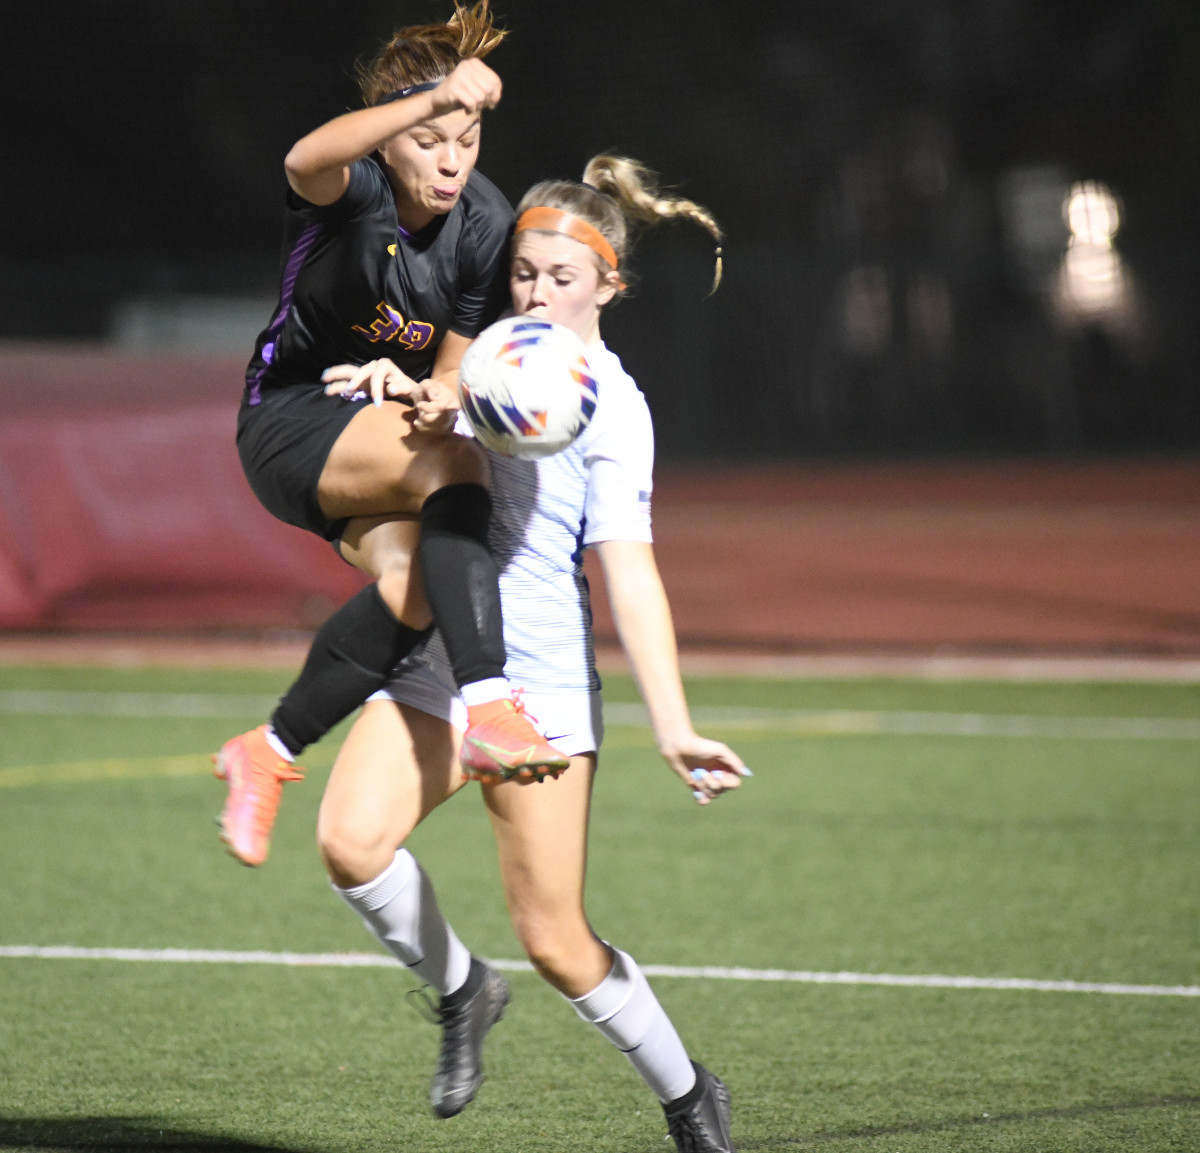 Montverde forward Antonella Mazziotto Duffaut (left) tries to control a pass in front of The First Academy's Hannah Hudson. Mazziotto scored three goals in the Eagles' 5-0 victory.